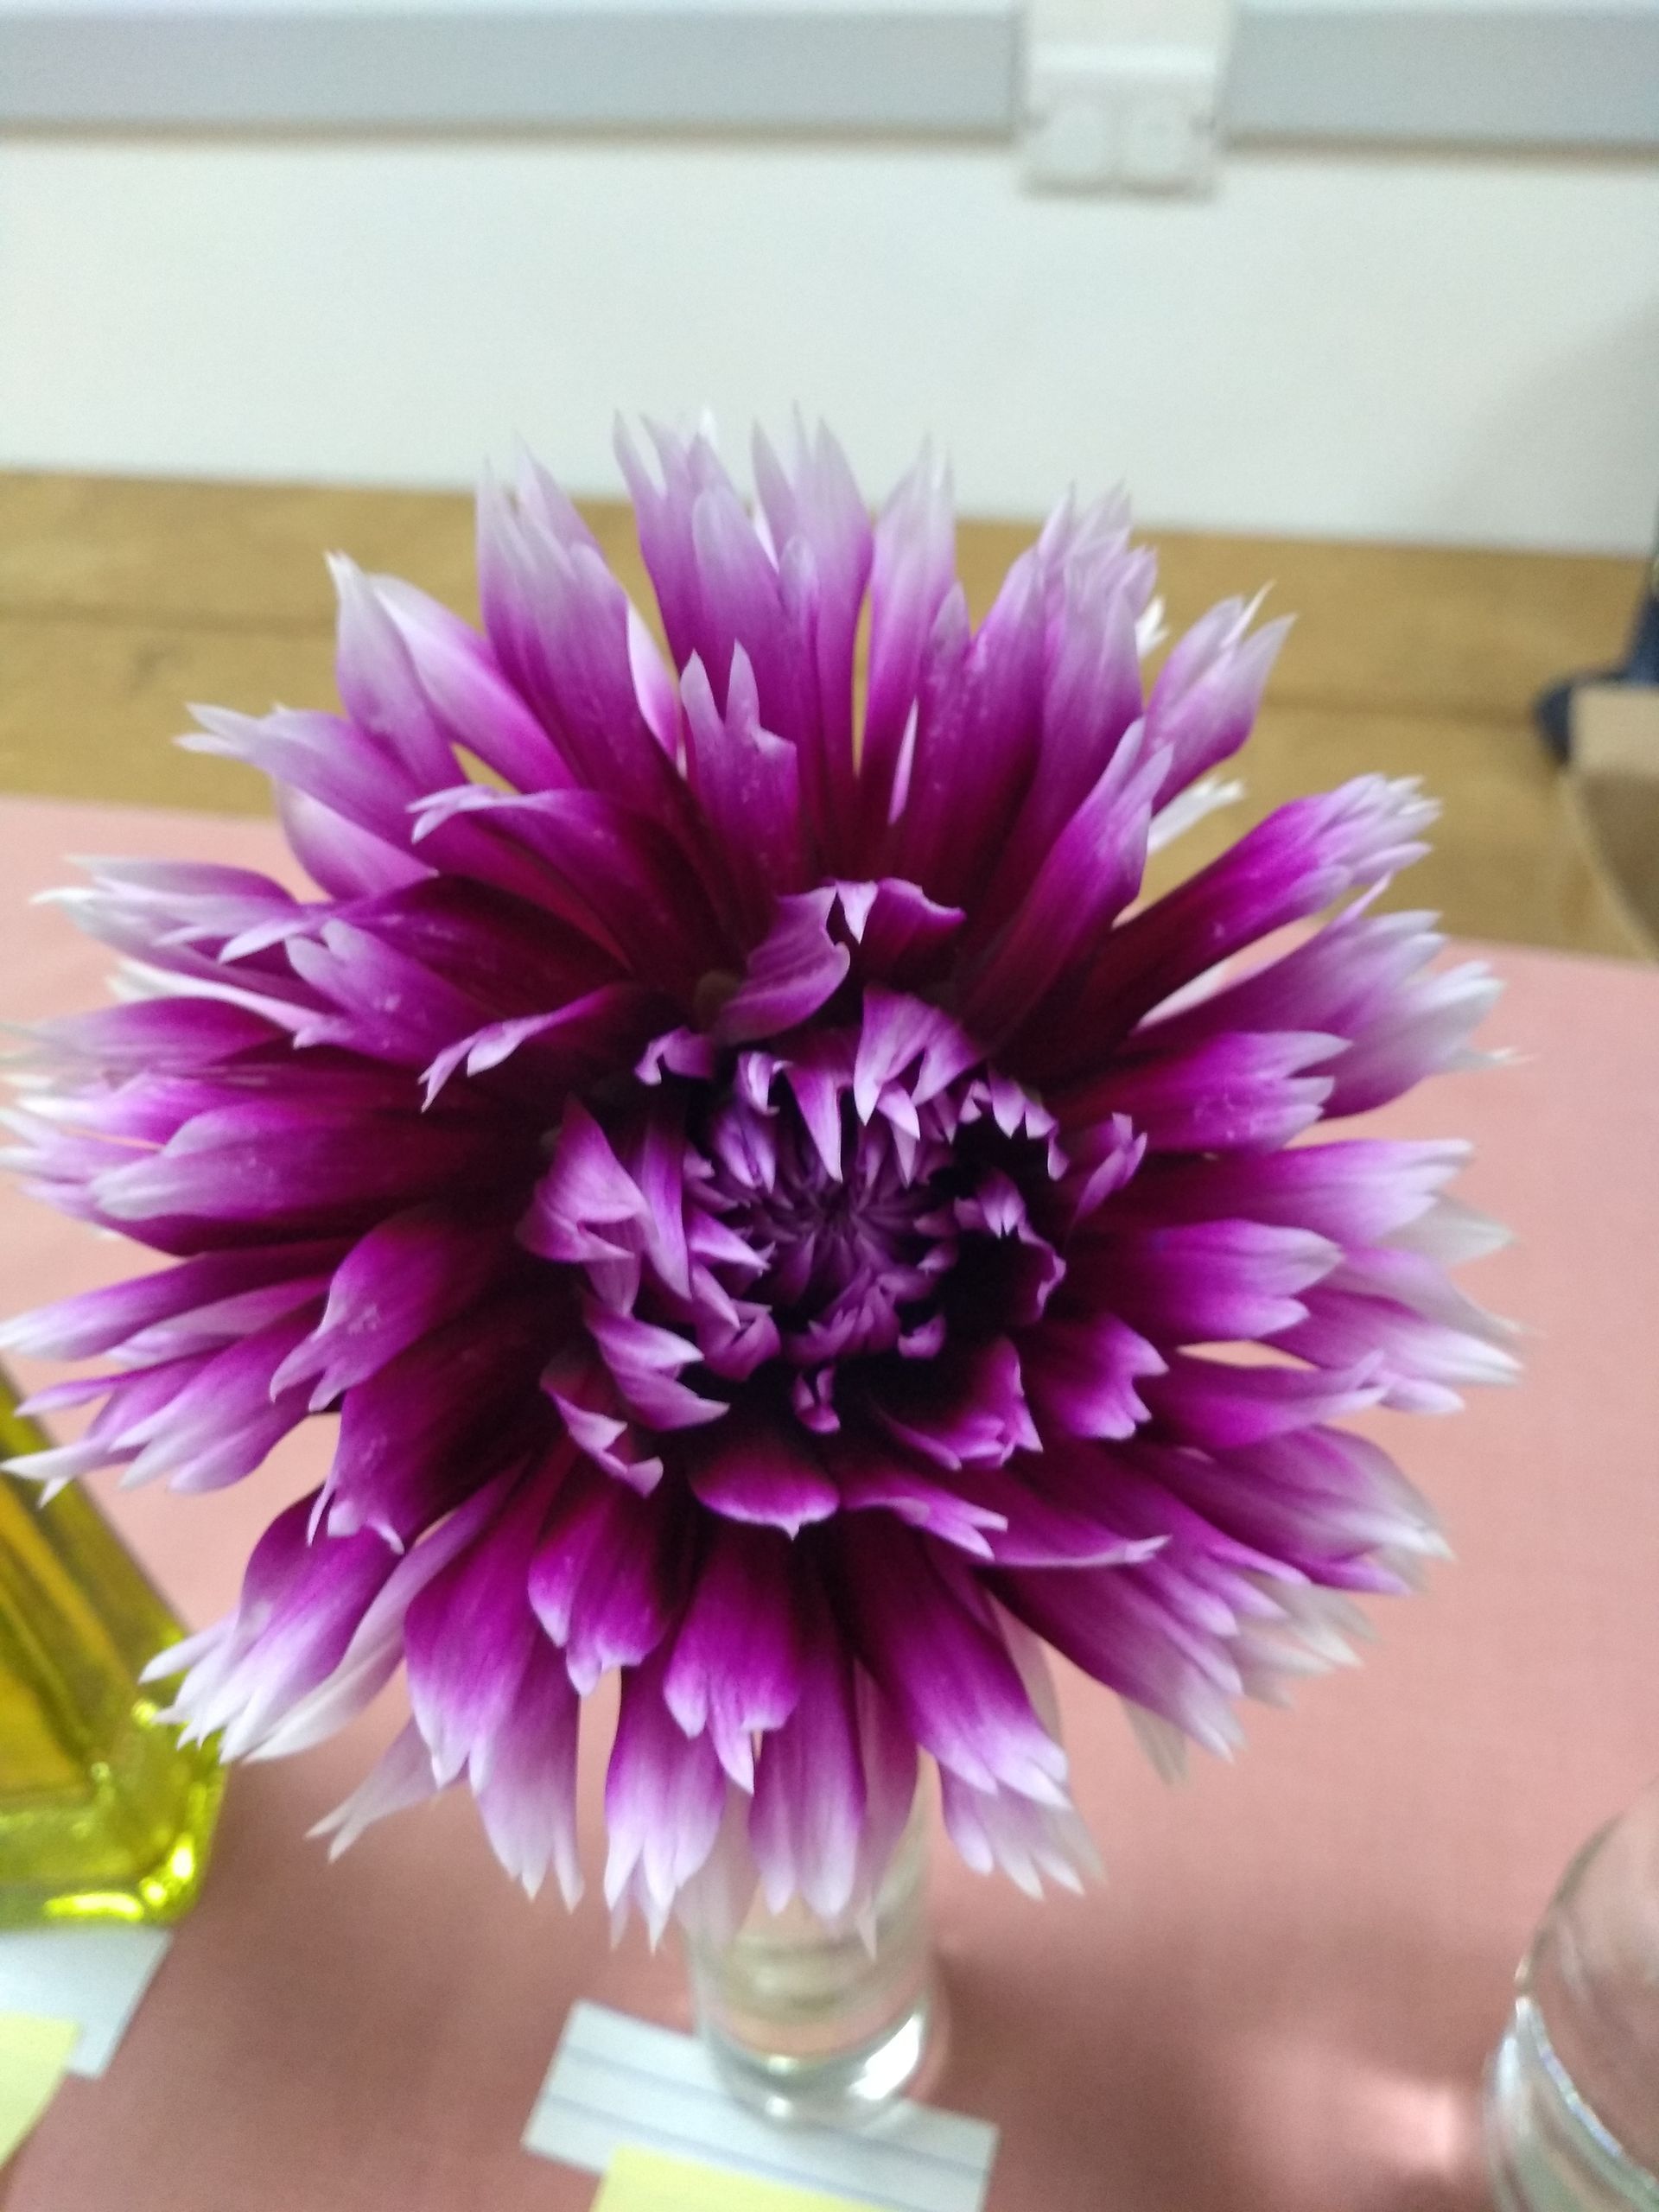 Second place dahlia, purple with paler tips, Dee R